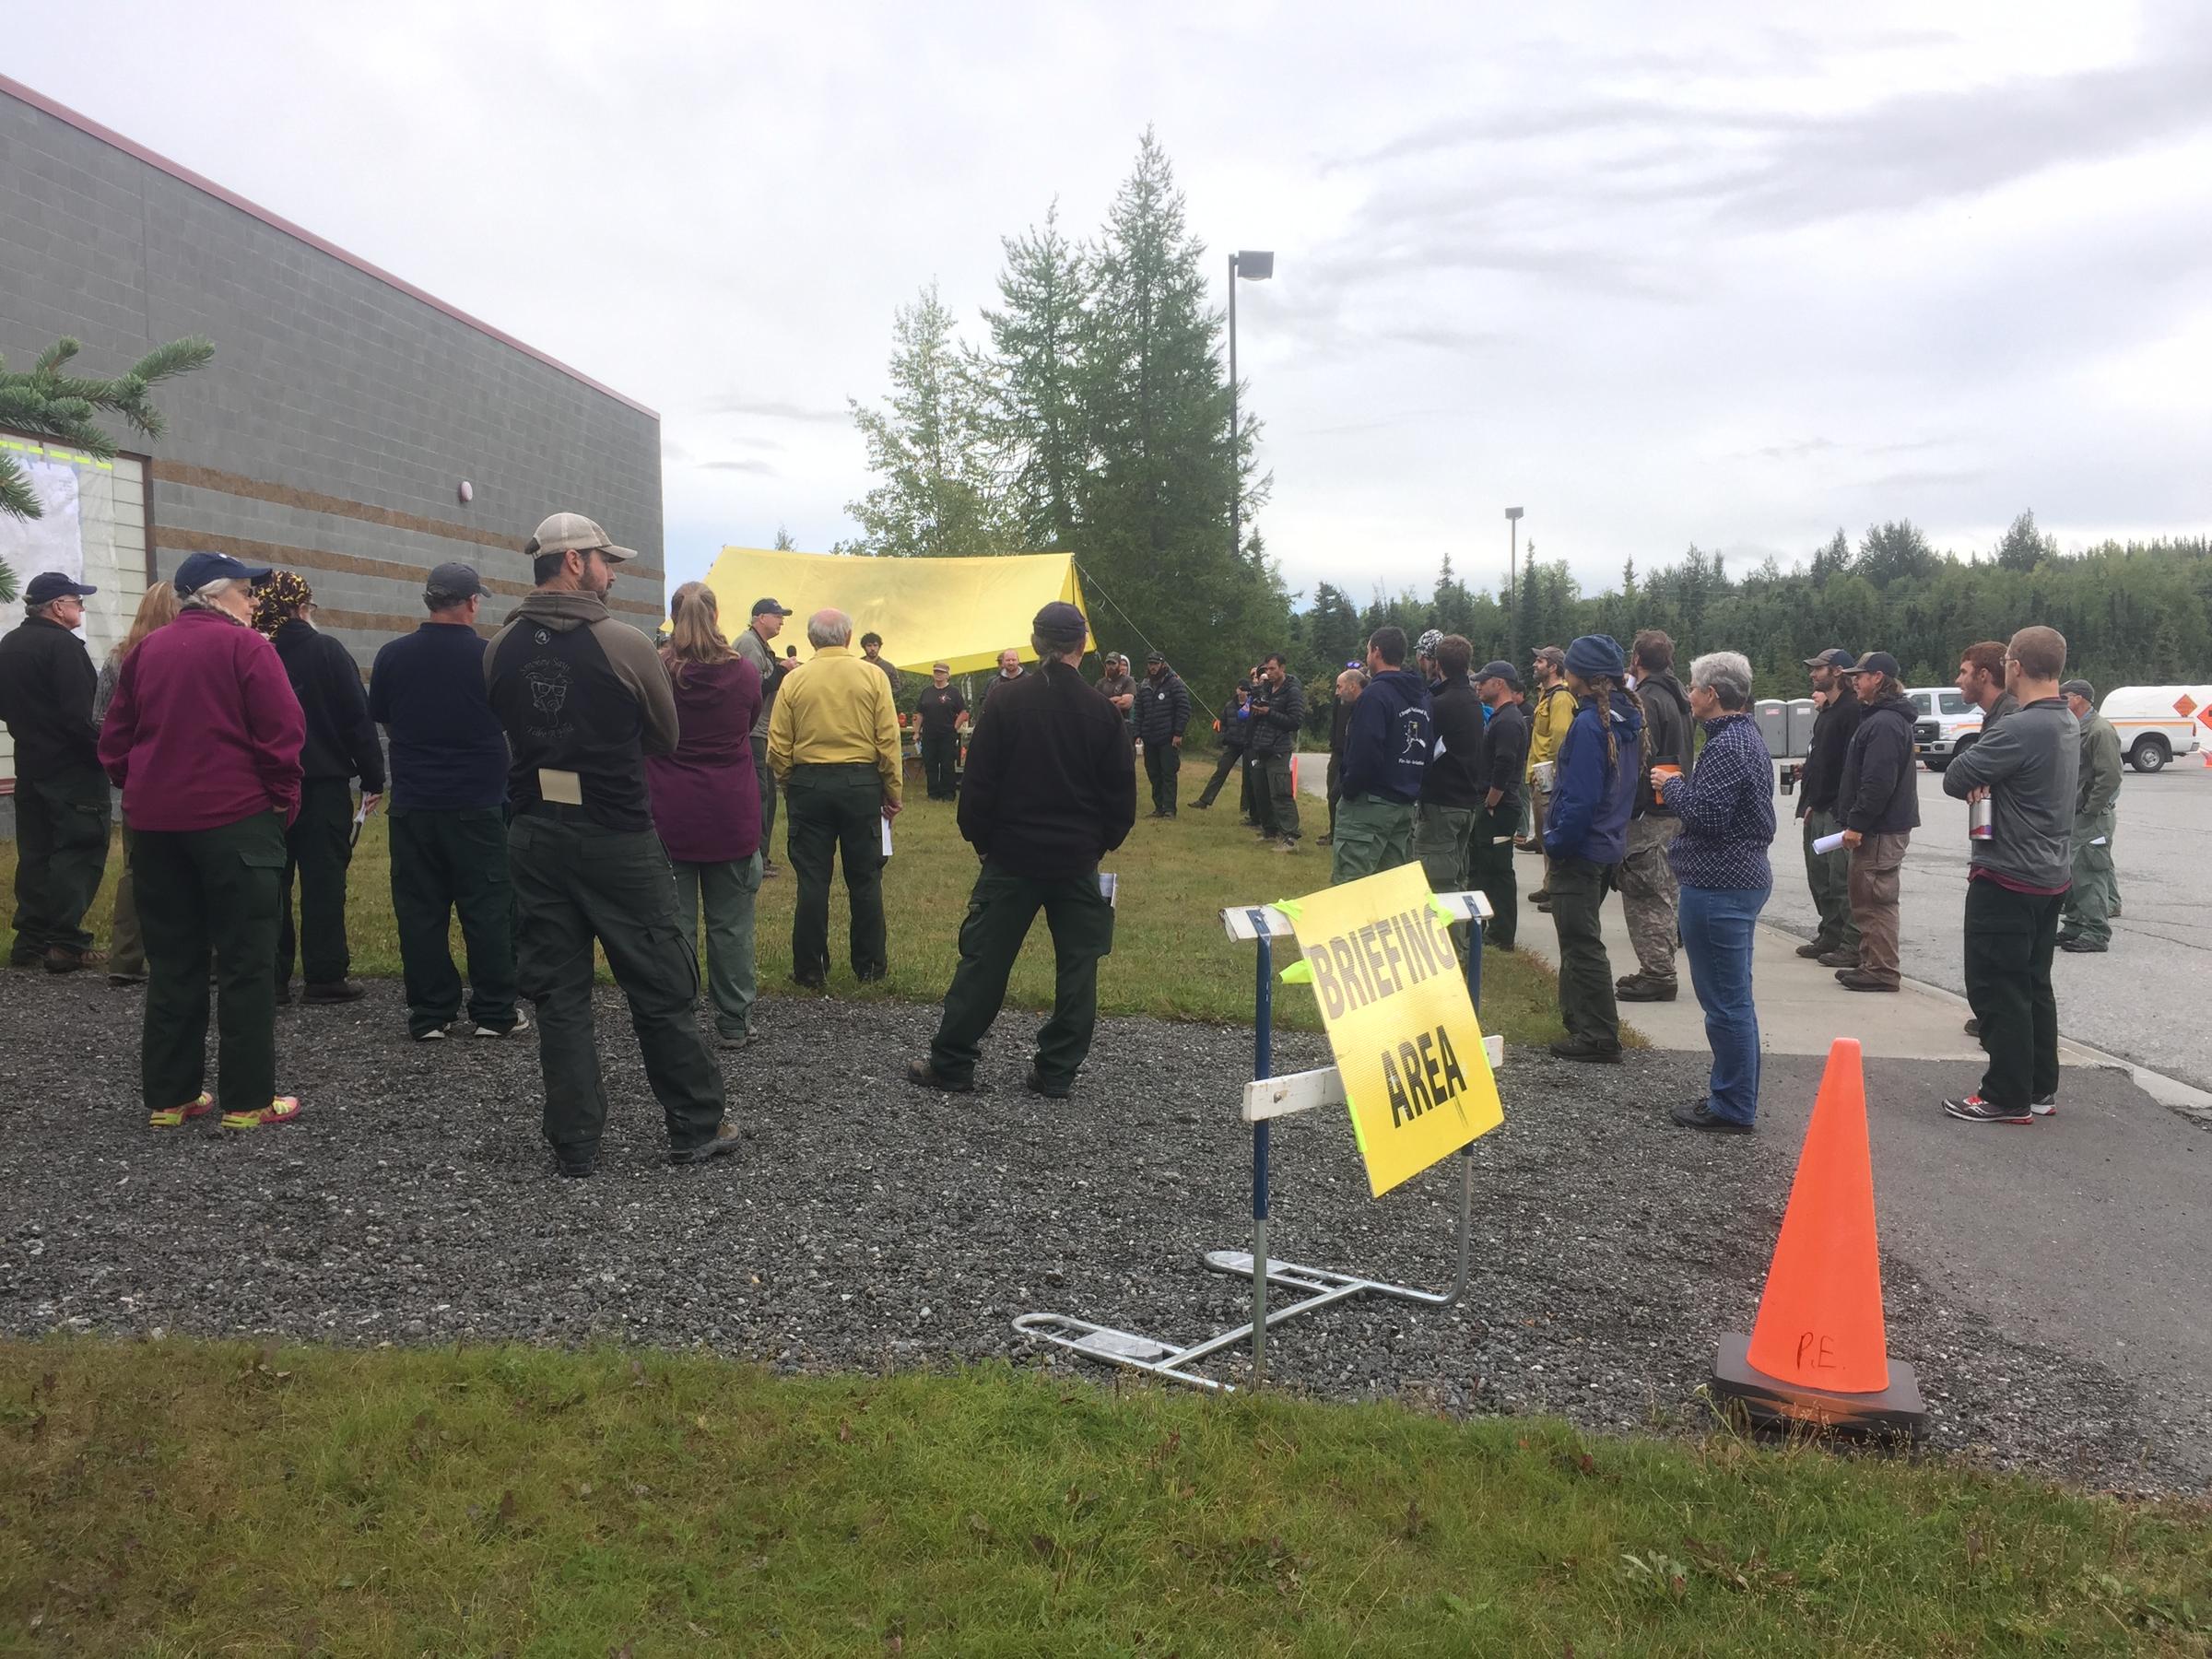 Fire responders at the McHugh fire daily briefing Tuesday morning. Alaska's Chena, Tanana Chiefs Conference and White Mountain firefighter crews are mopping up hot spots. (Photo by  Joaqlin Estus, KNBA - Anchorage)